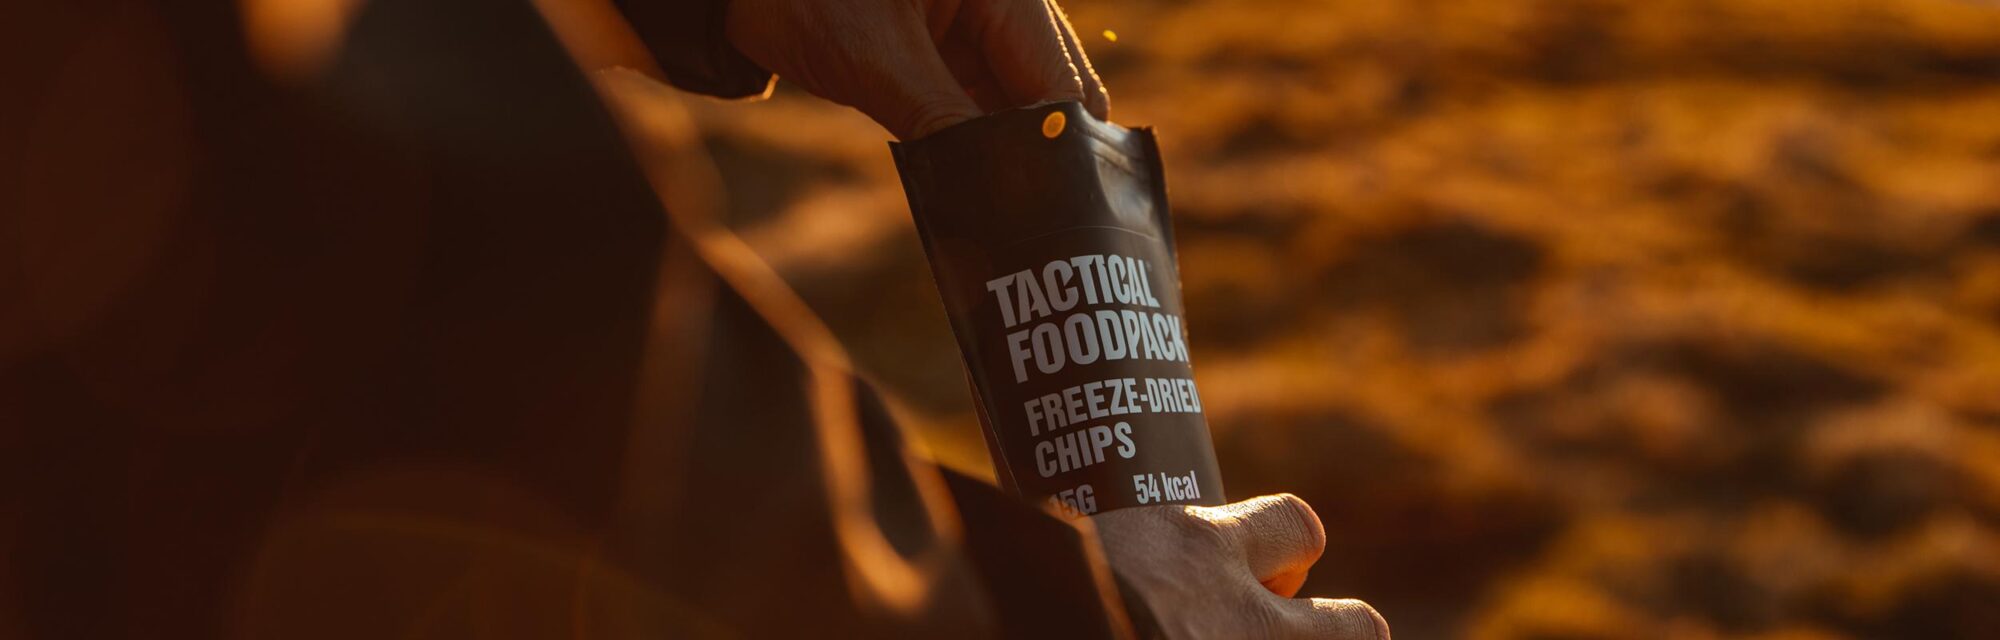 Tactical Foodpack freeze dried snacks